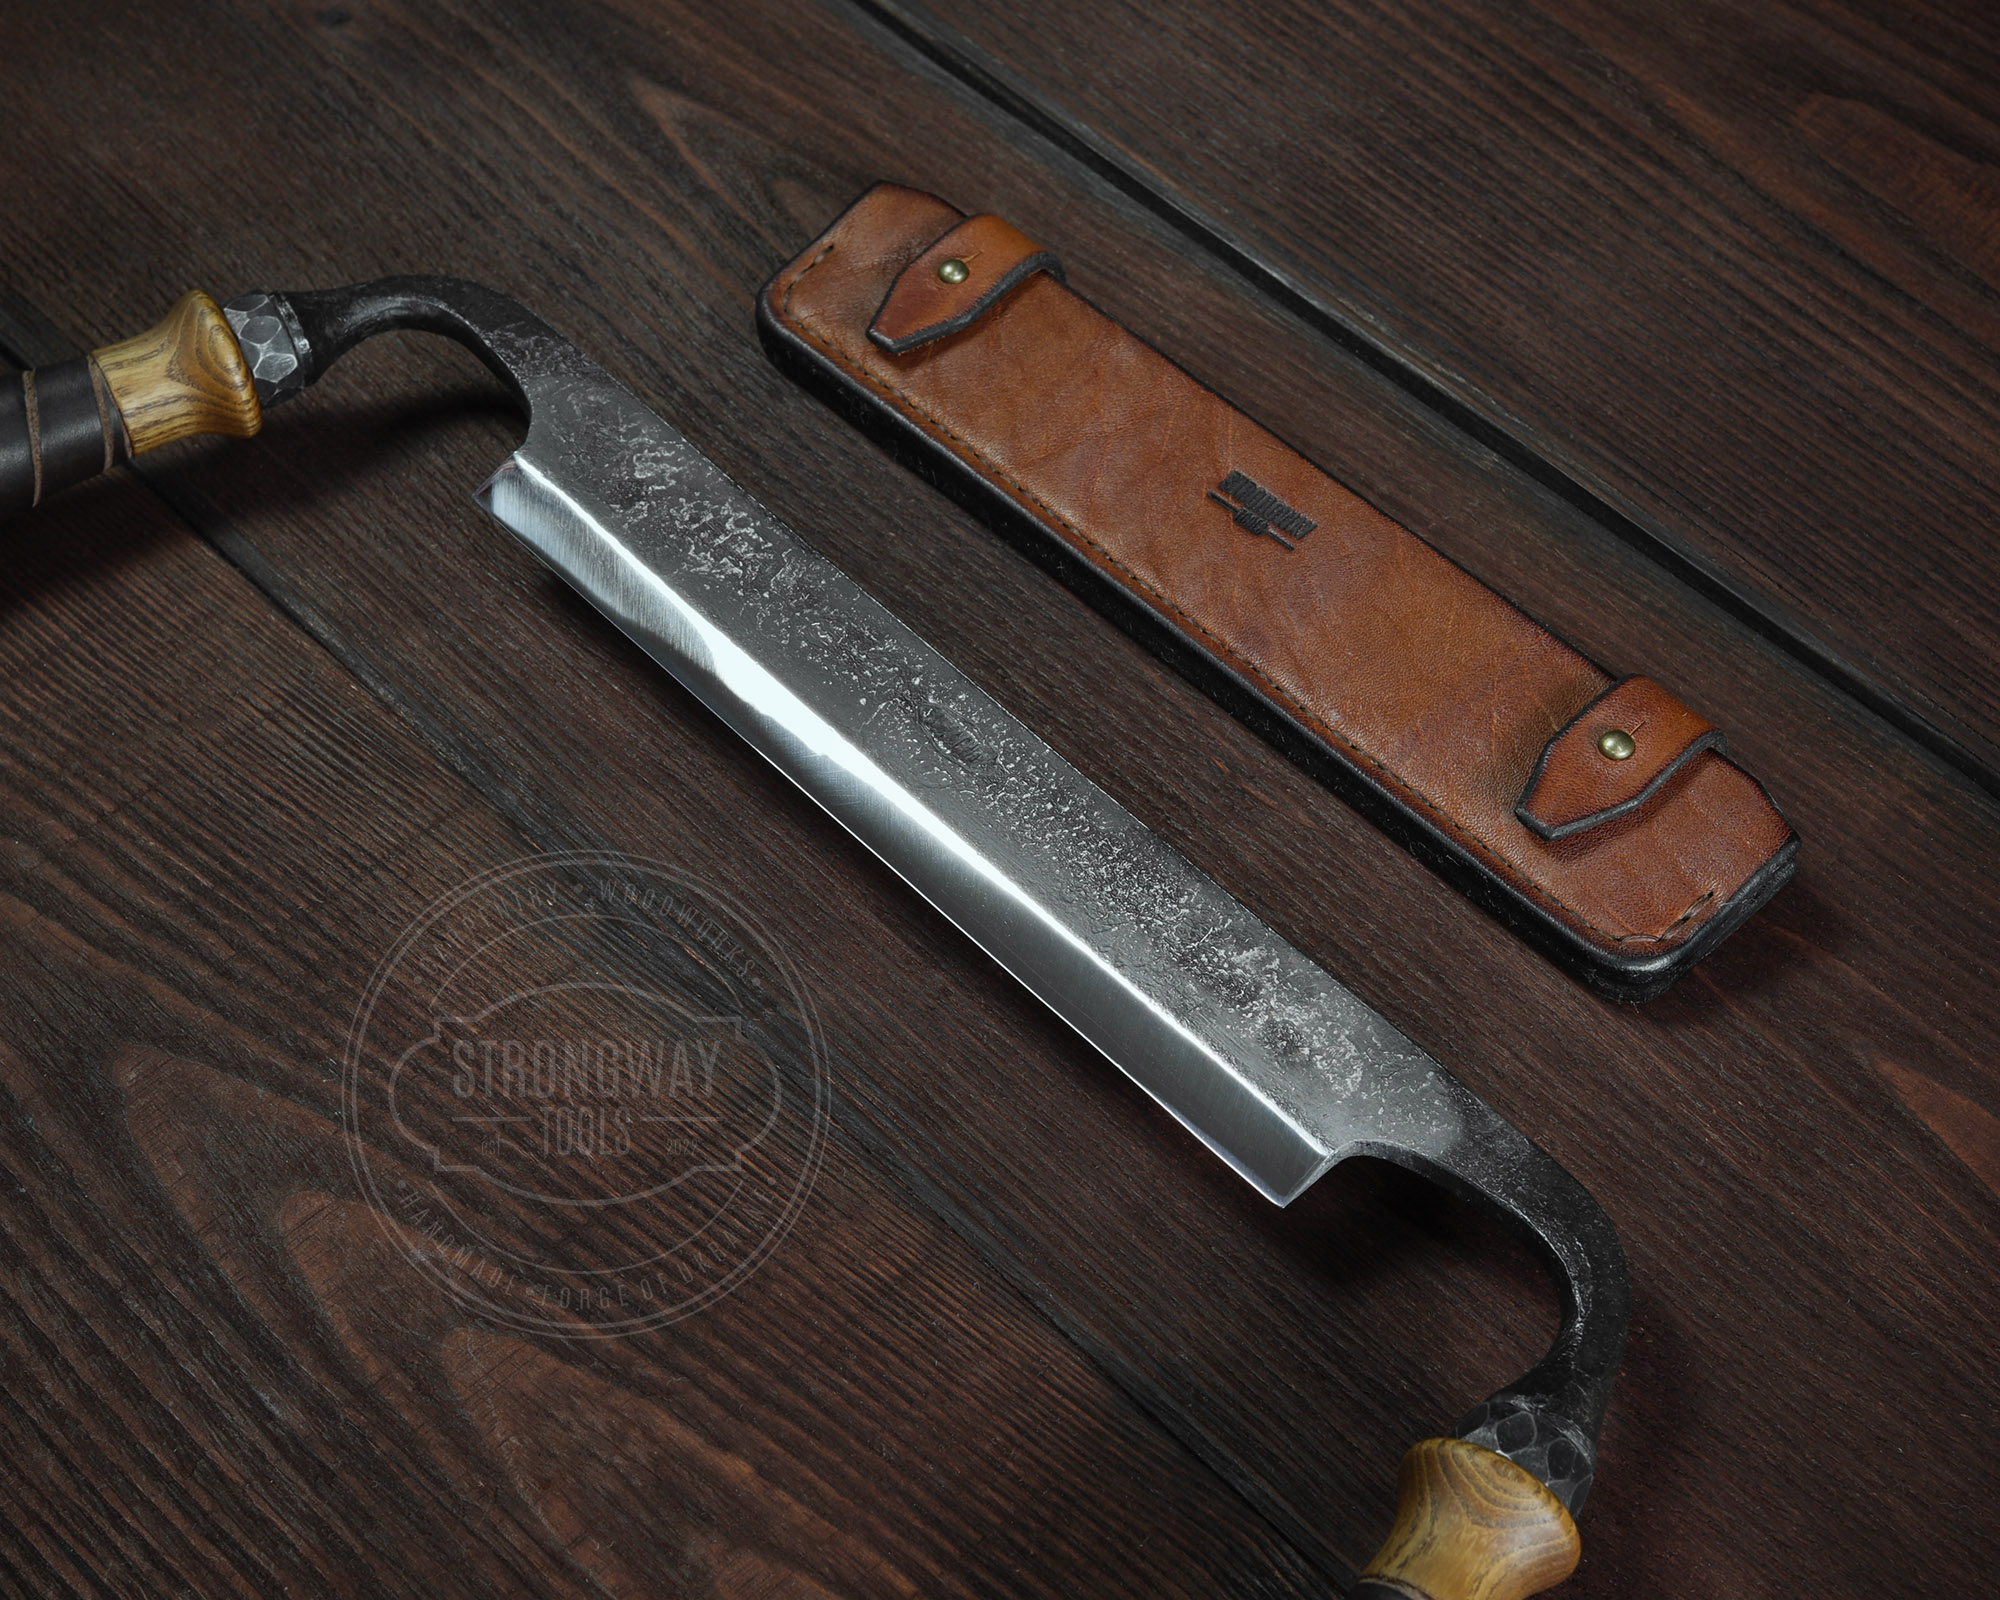 Announcing the Gramercy Tools Spoonmaker's Drawknife